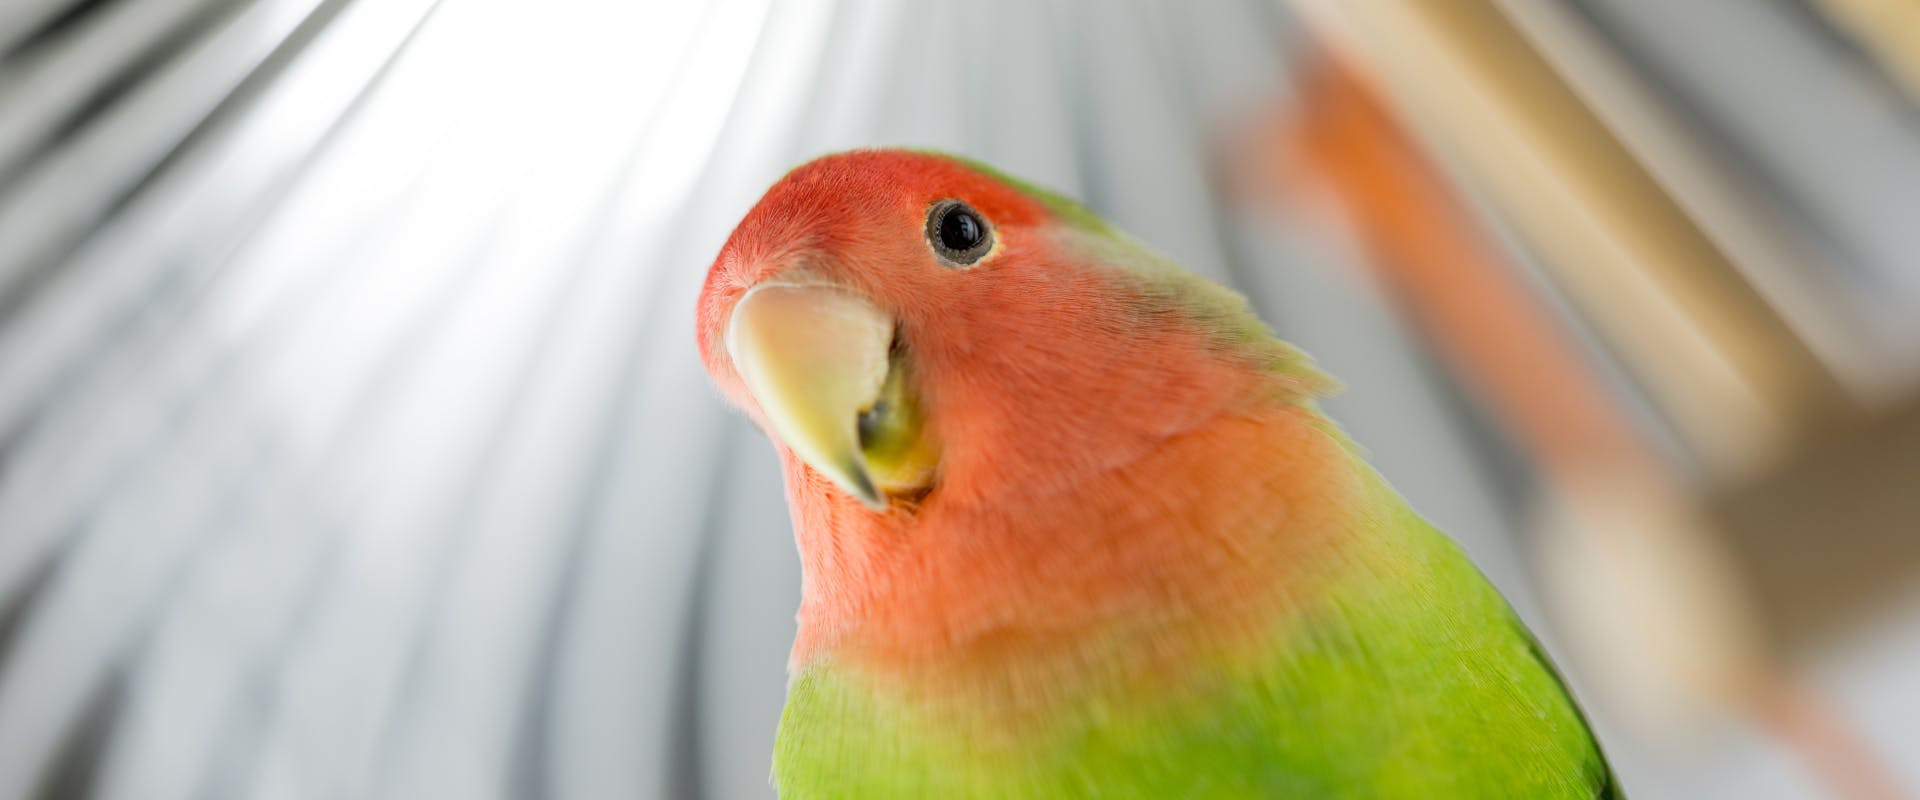 a red faced parakeet looking down at the camera with the top of its birdcage in the background